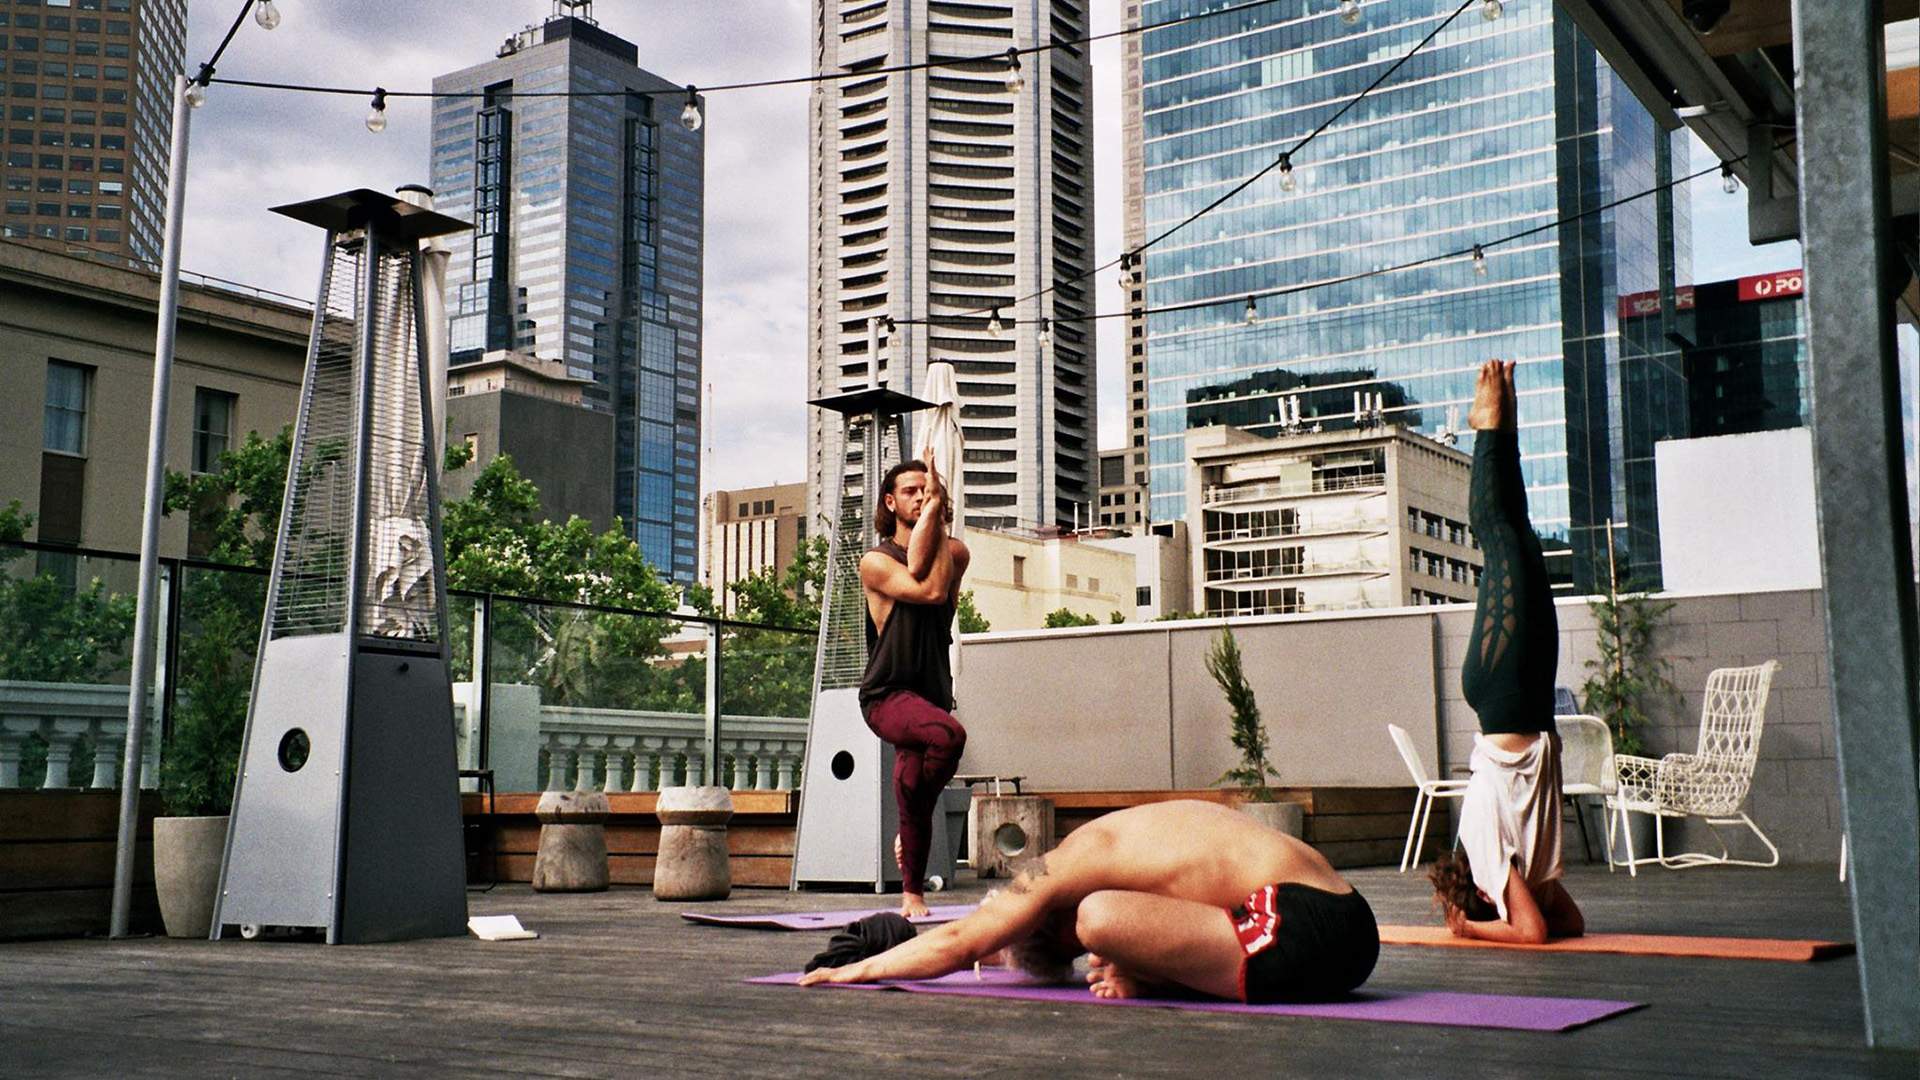 Rooftop Yoga, Melbourne